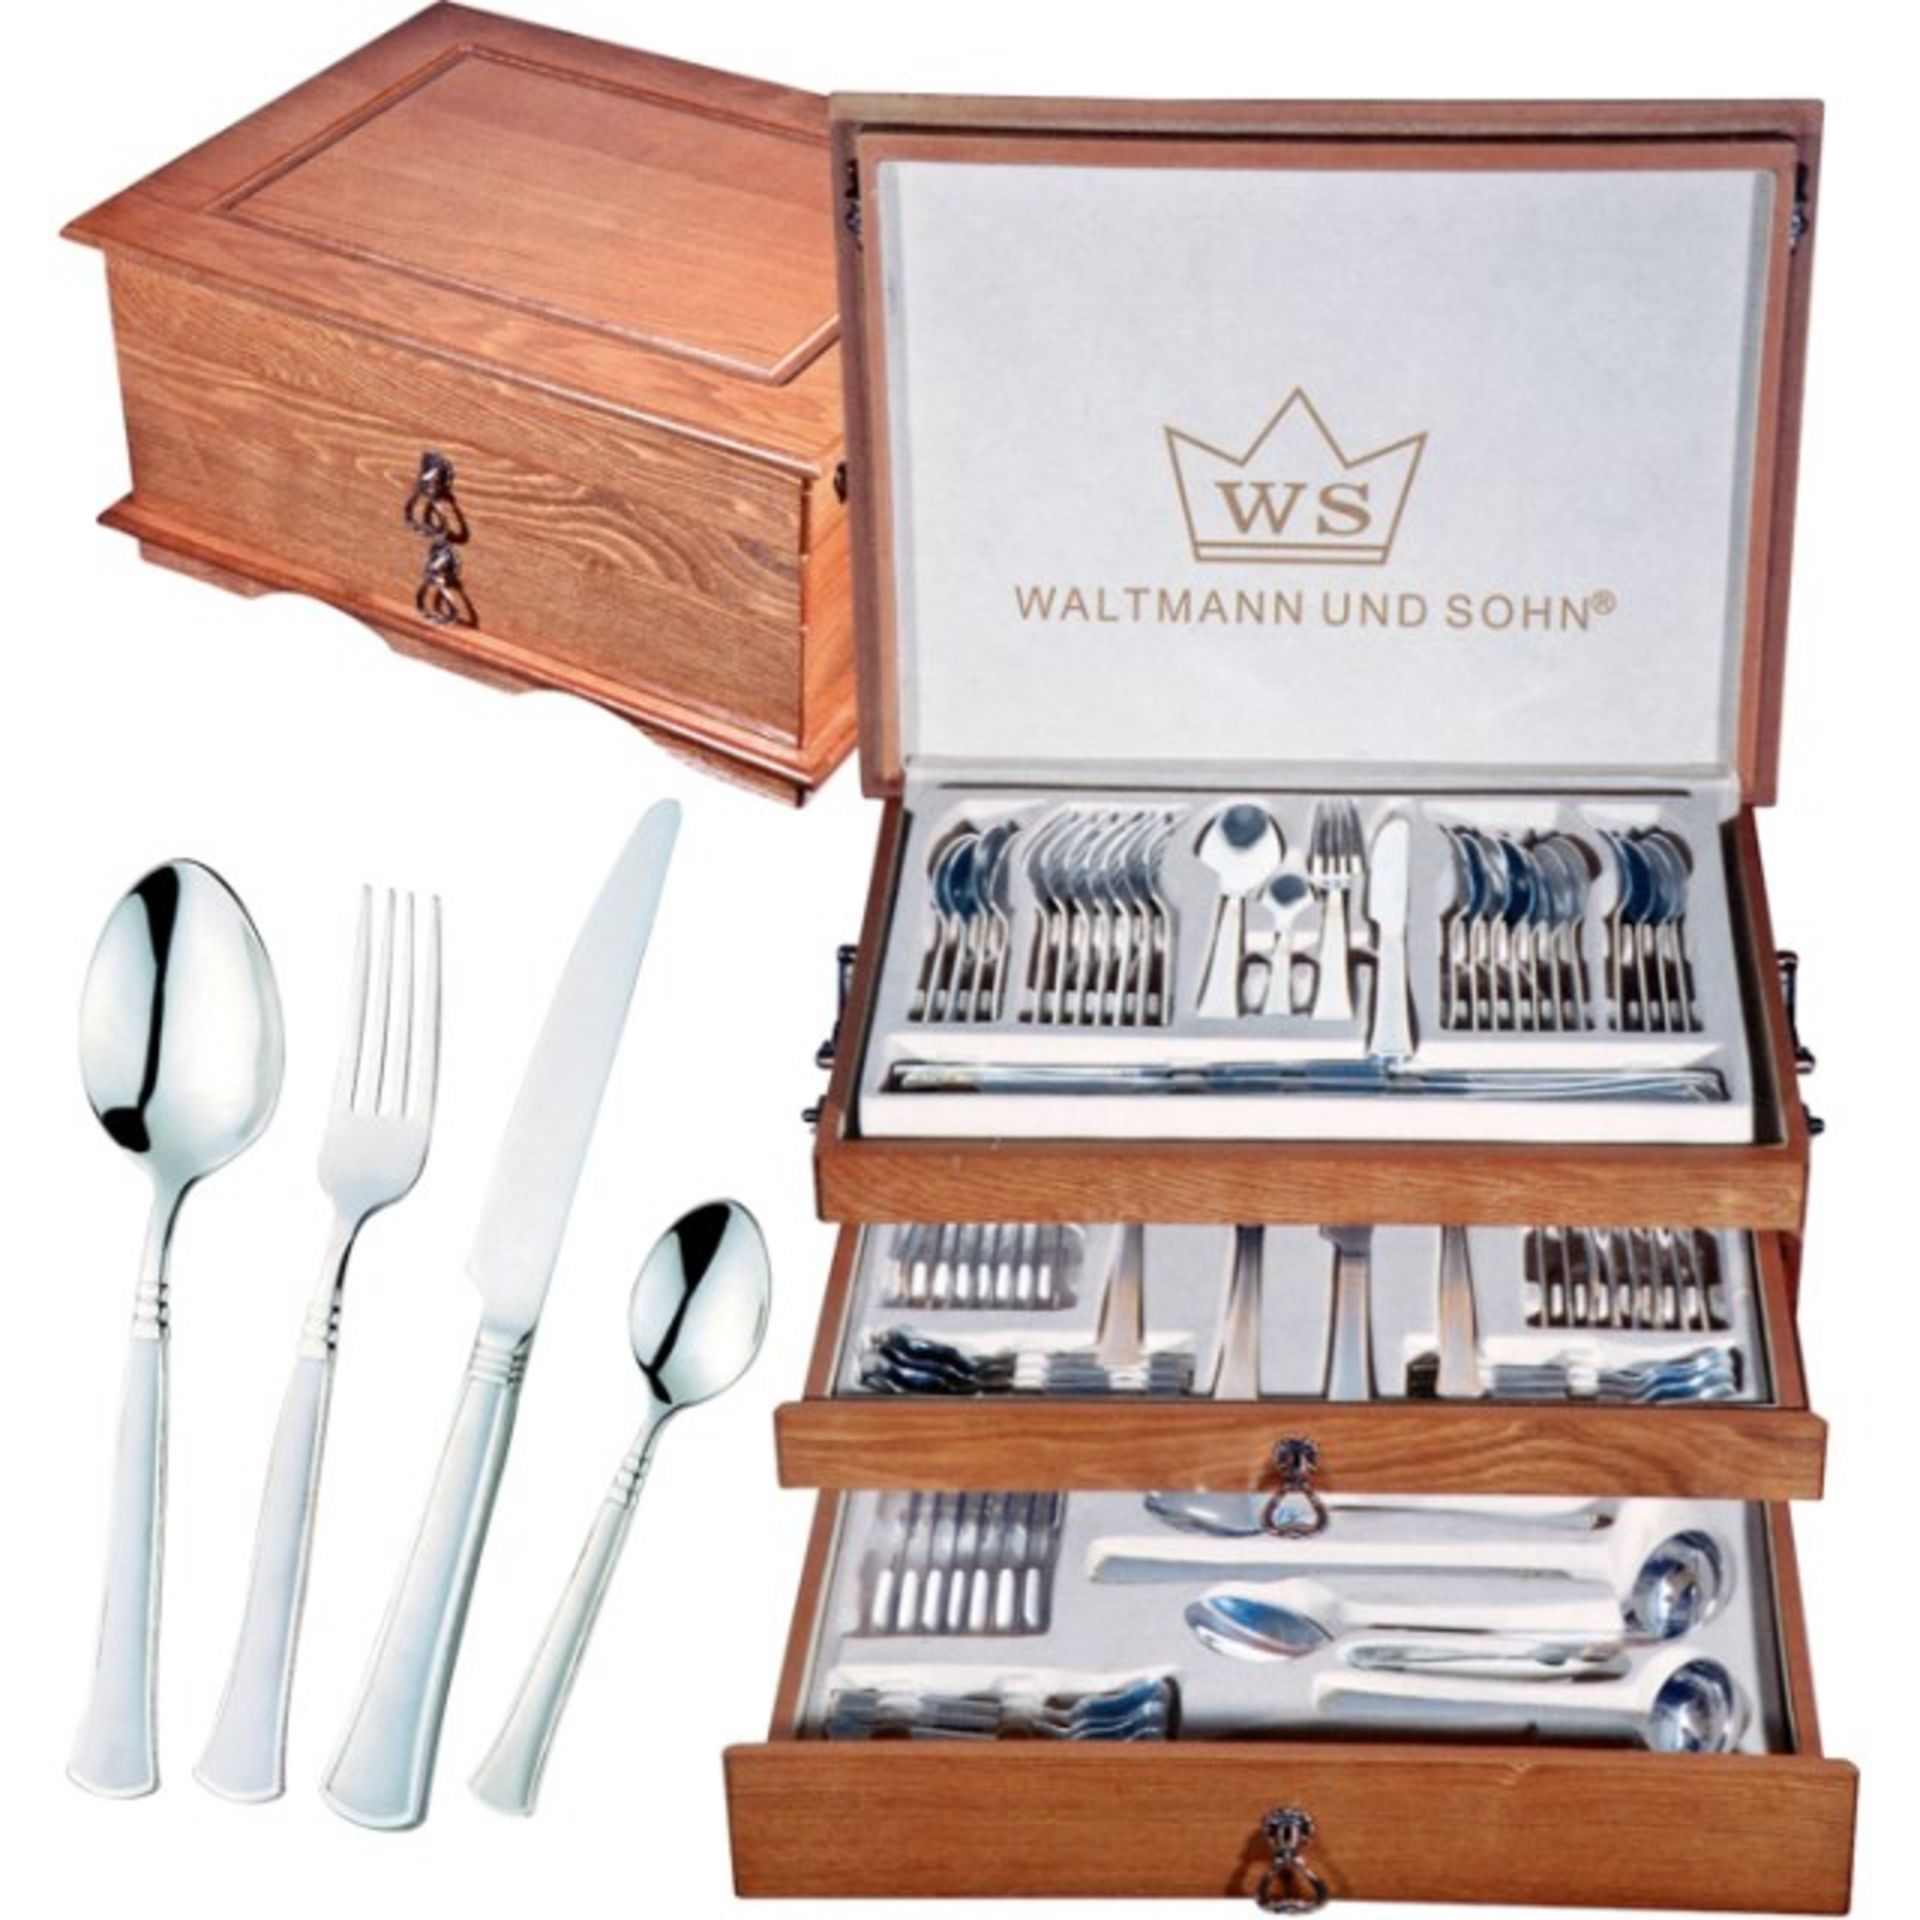 V Brand New Waltmann & Sons 87 Piece Polished Stainless Steel & Satin Finish Cutlery Set In Wooden